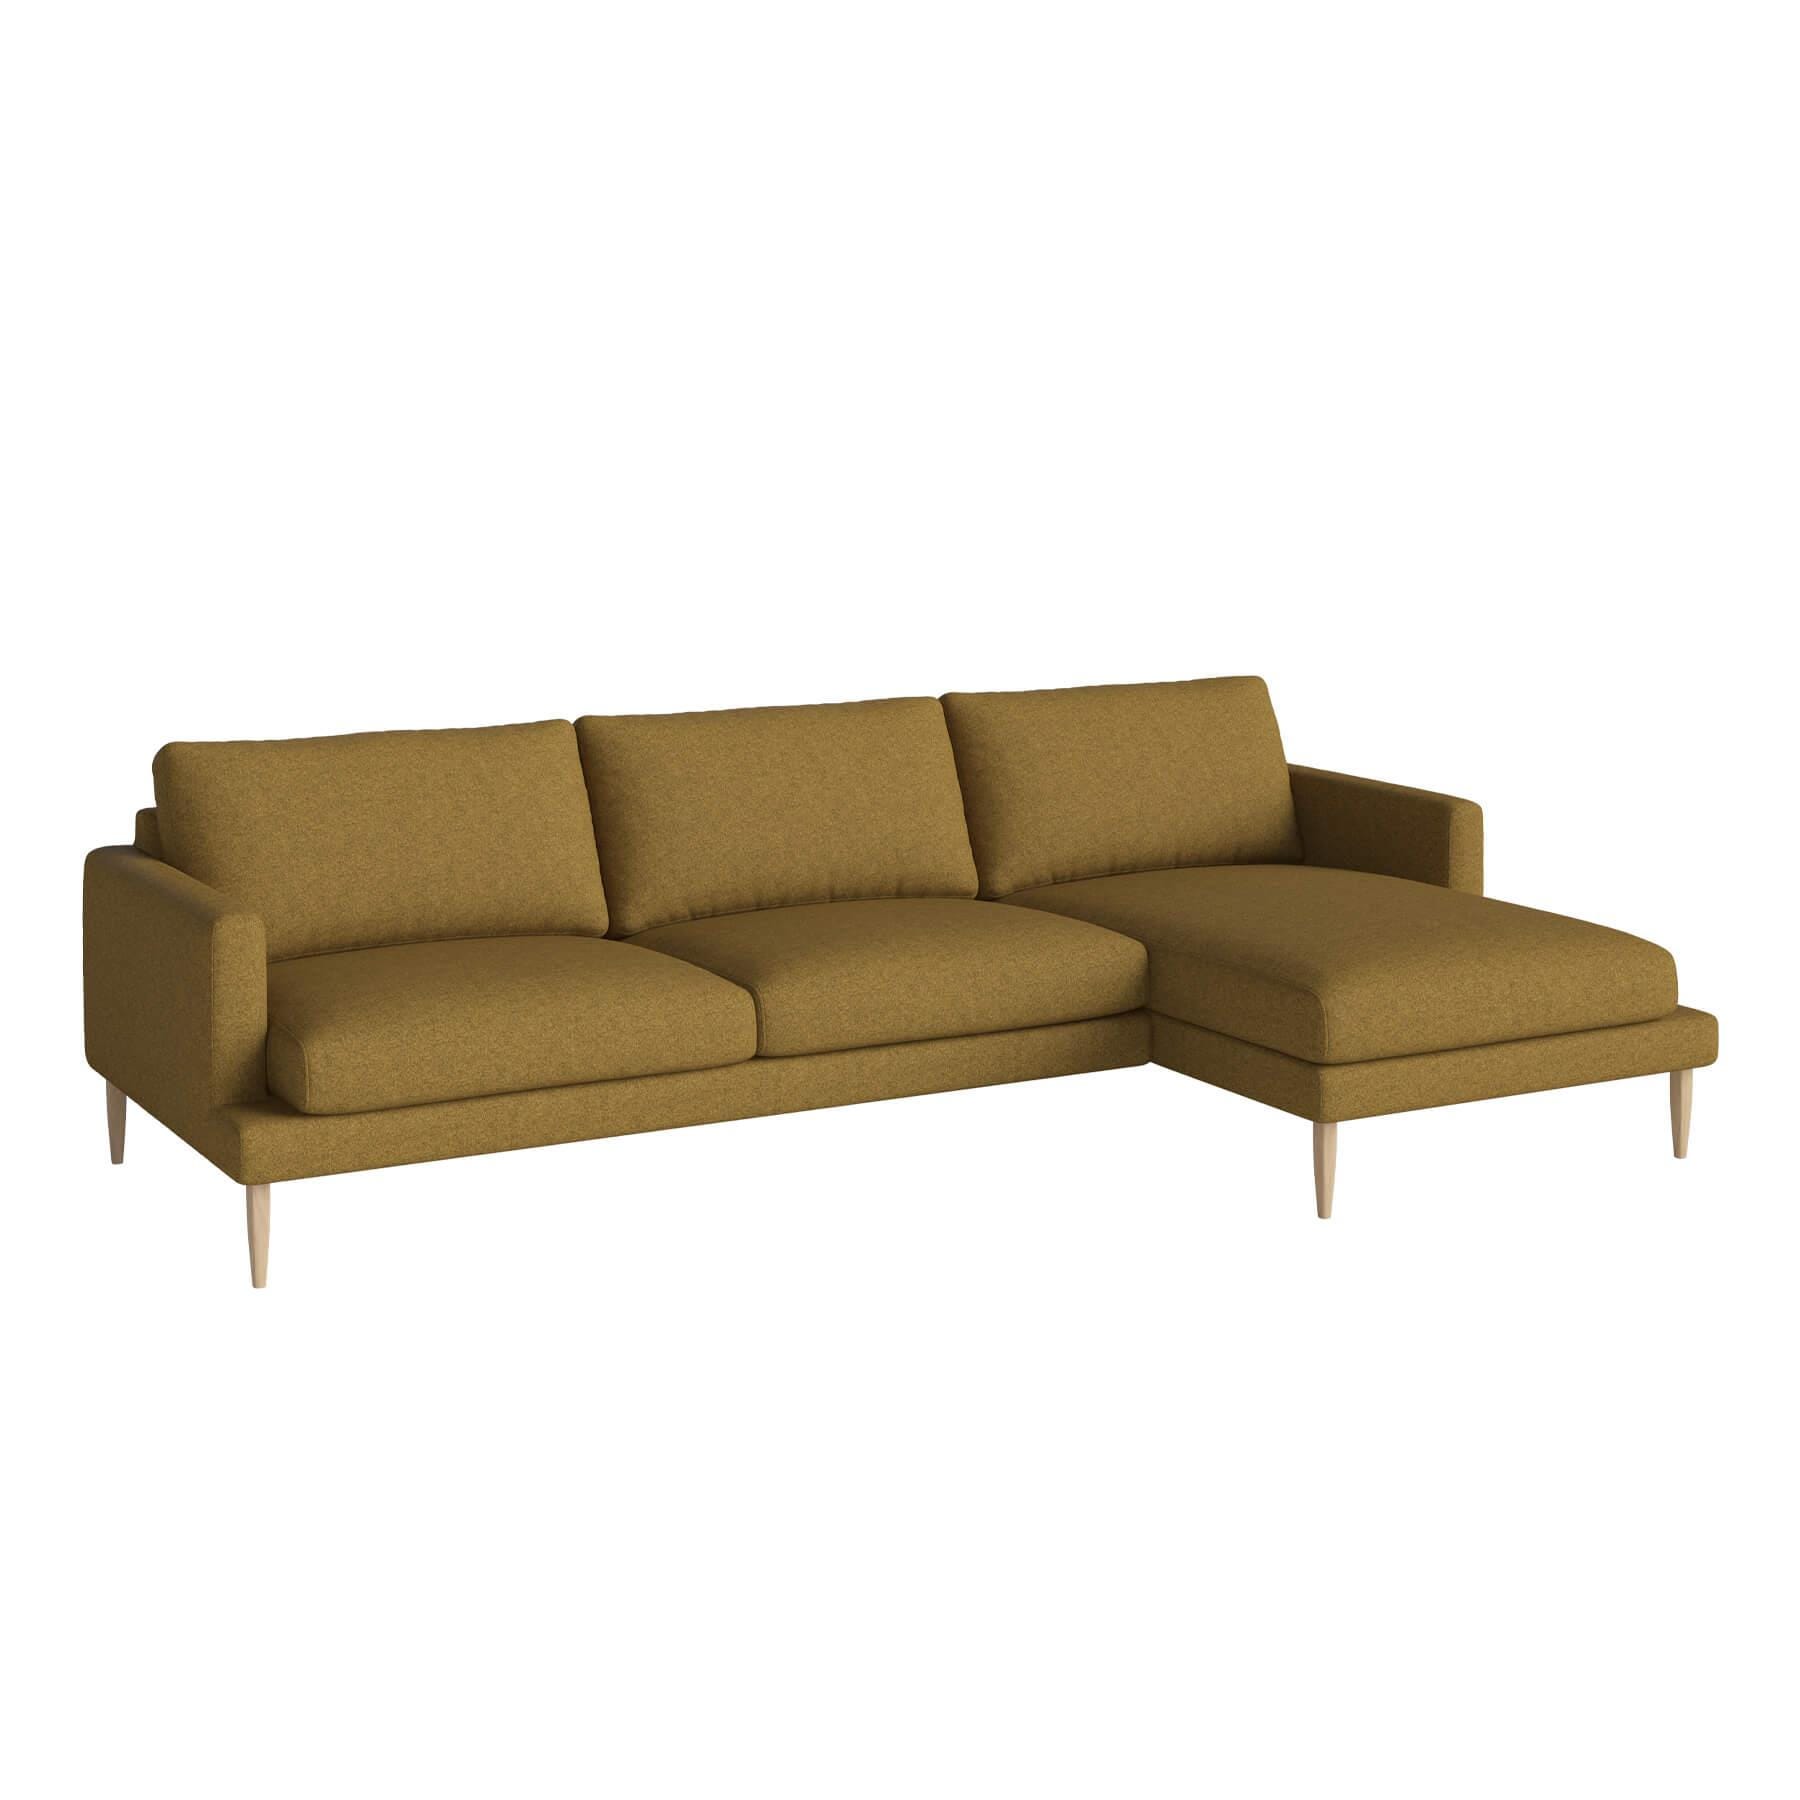 Bolia Veneda Sofa 35 Seater Sofa With Chaise Longue White Oiled Oak Qual Curry Right Brown Designer Furniture From Holloways Of Ludlow